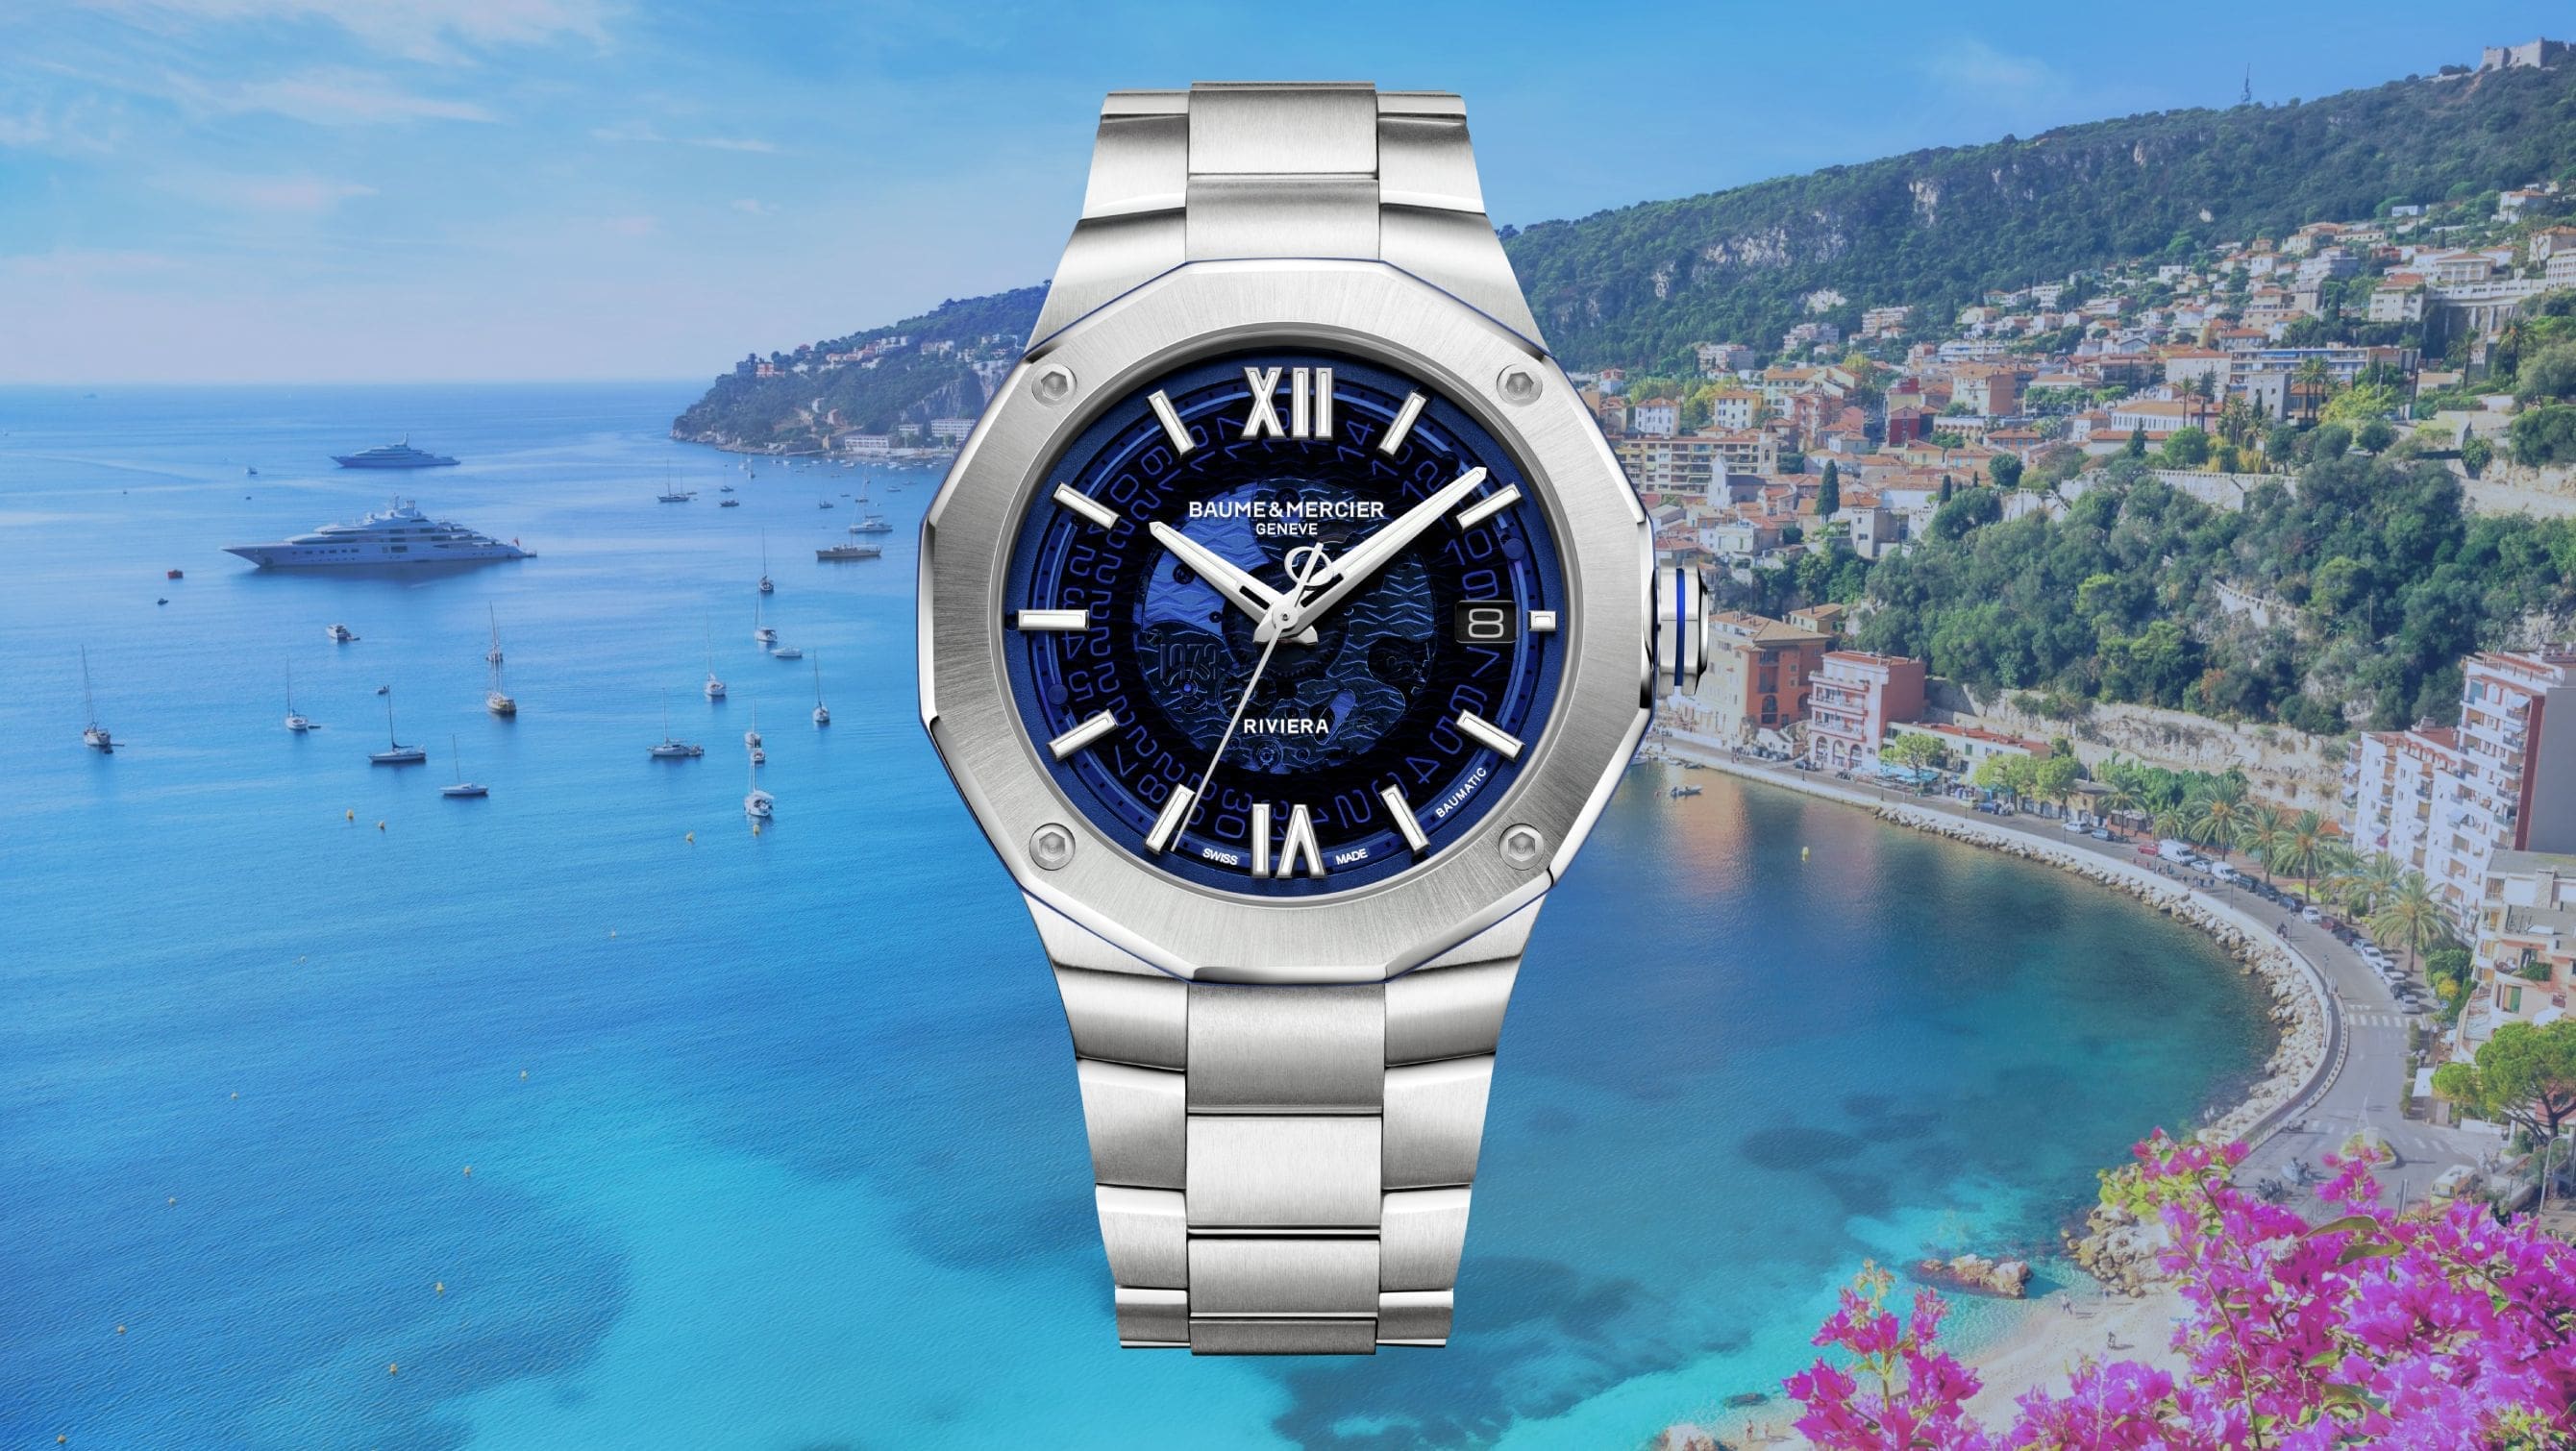 Baume & Mercier rounds off the Riviera’s 50th anniversary with a subtle commemorative special edition